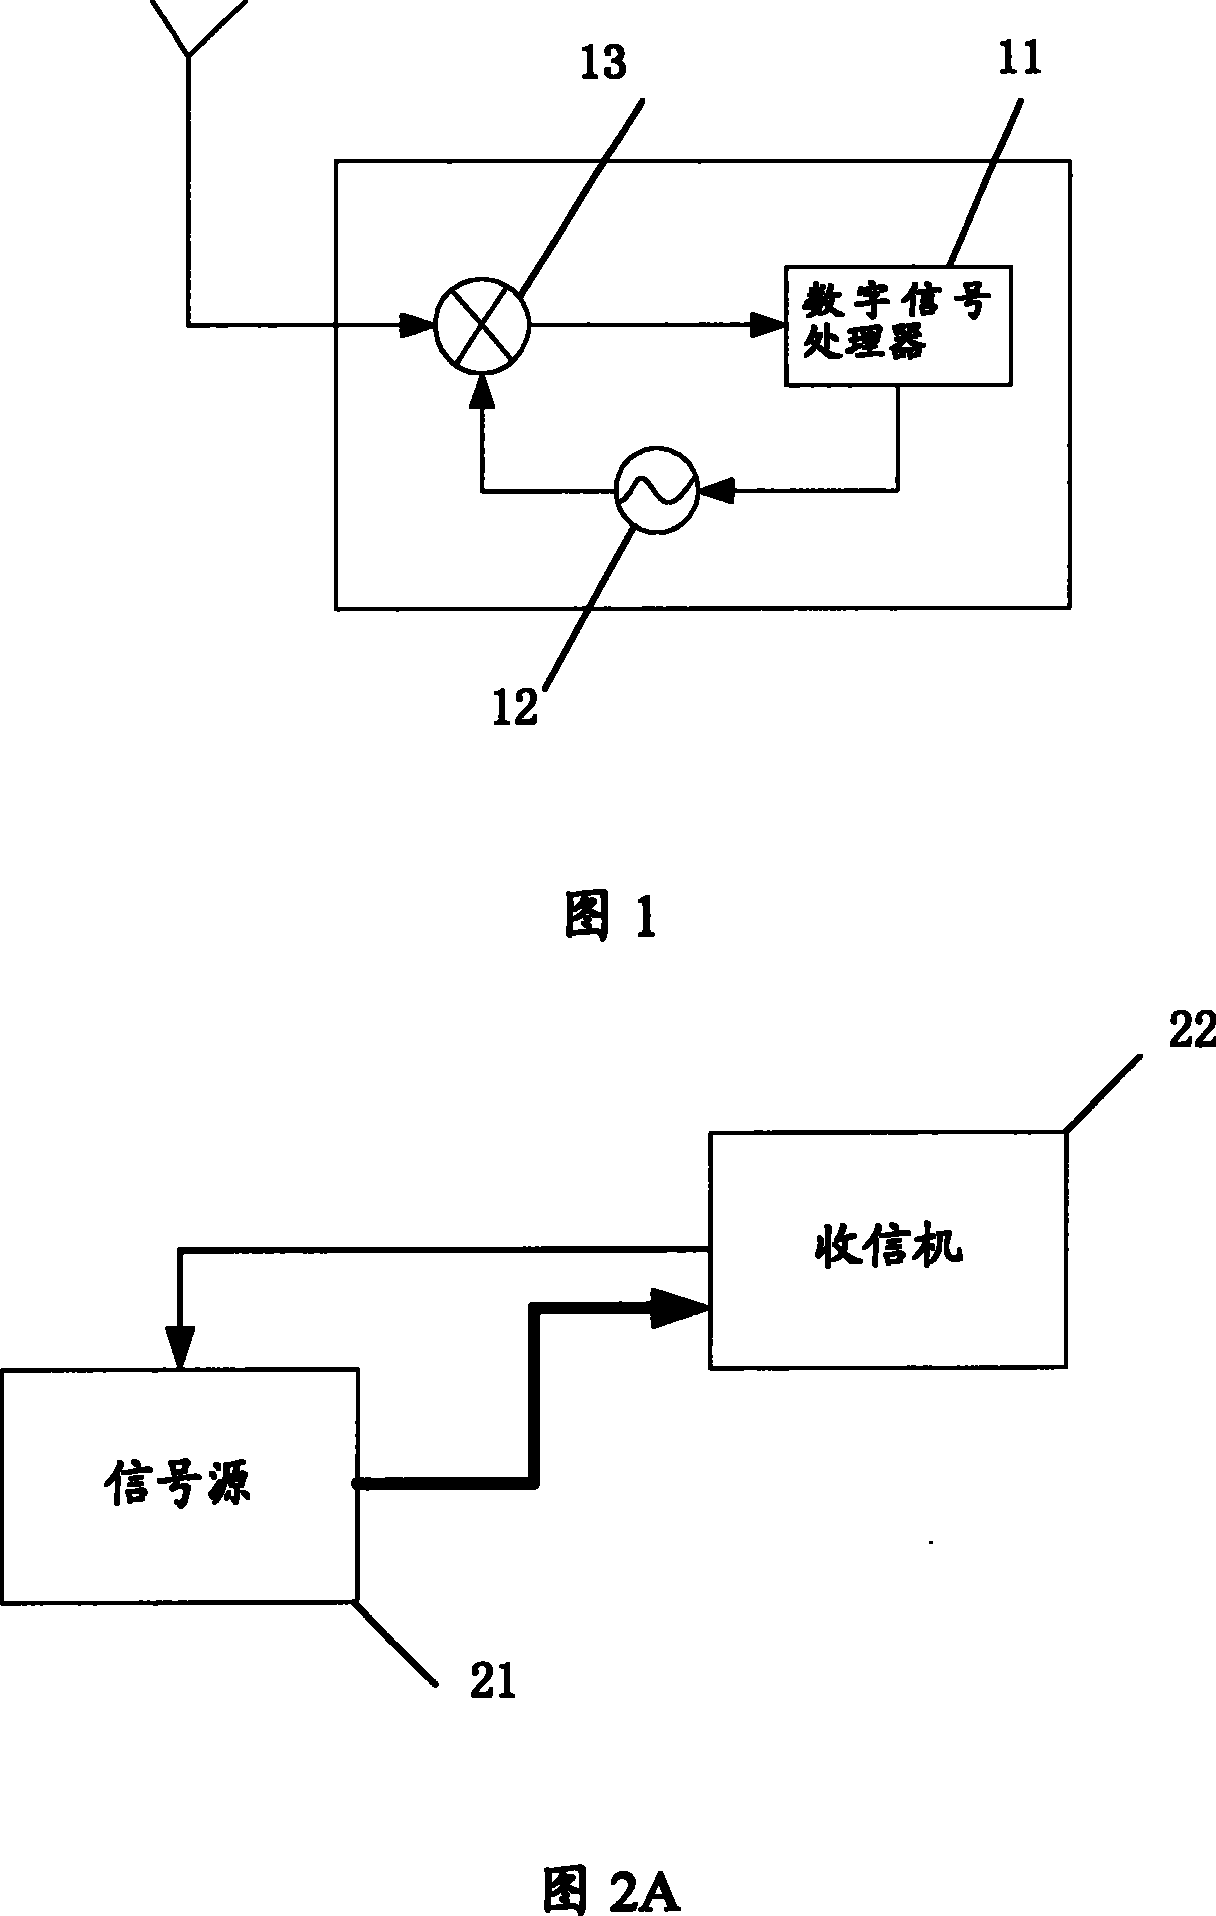 Method and system for signal synchronization between receiver-transmitter and instrument